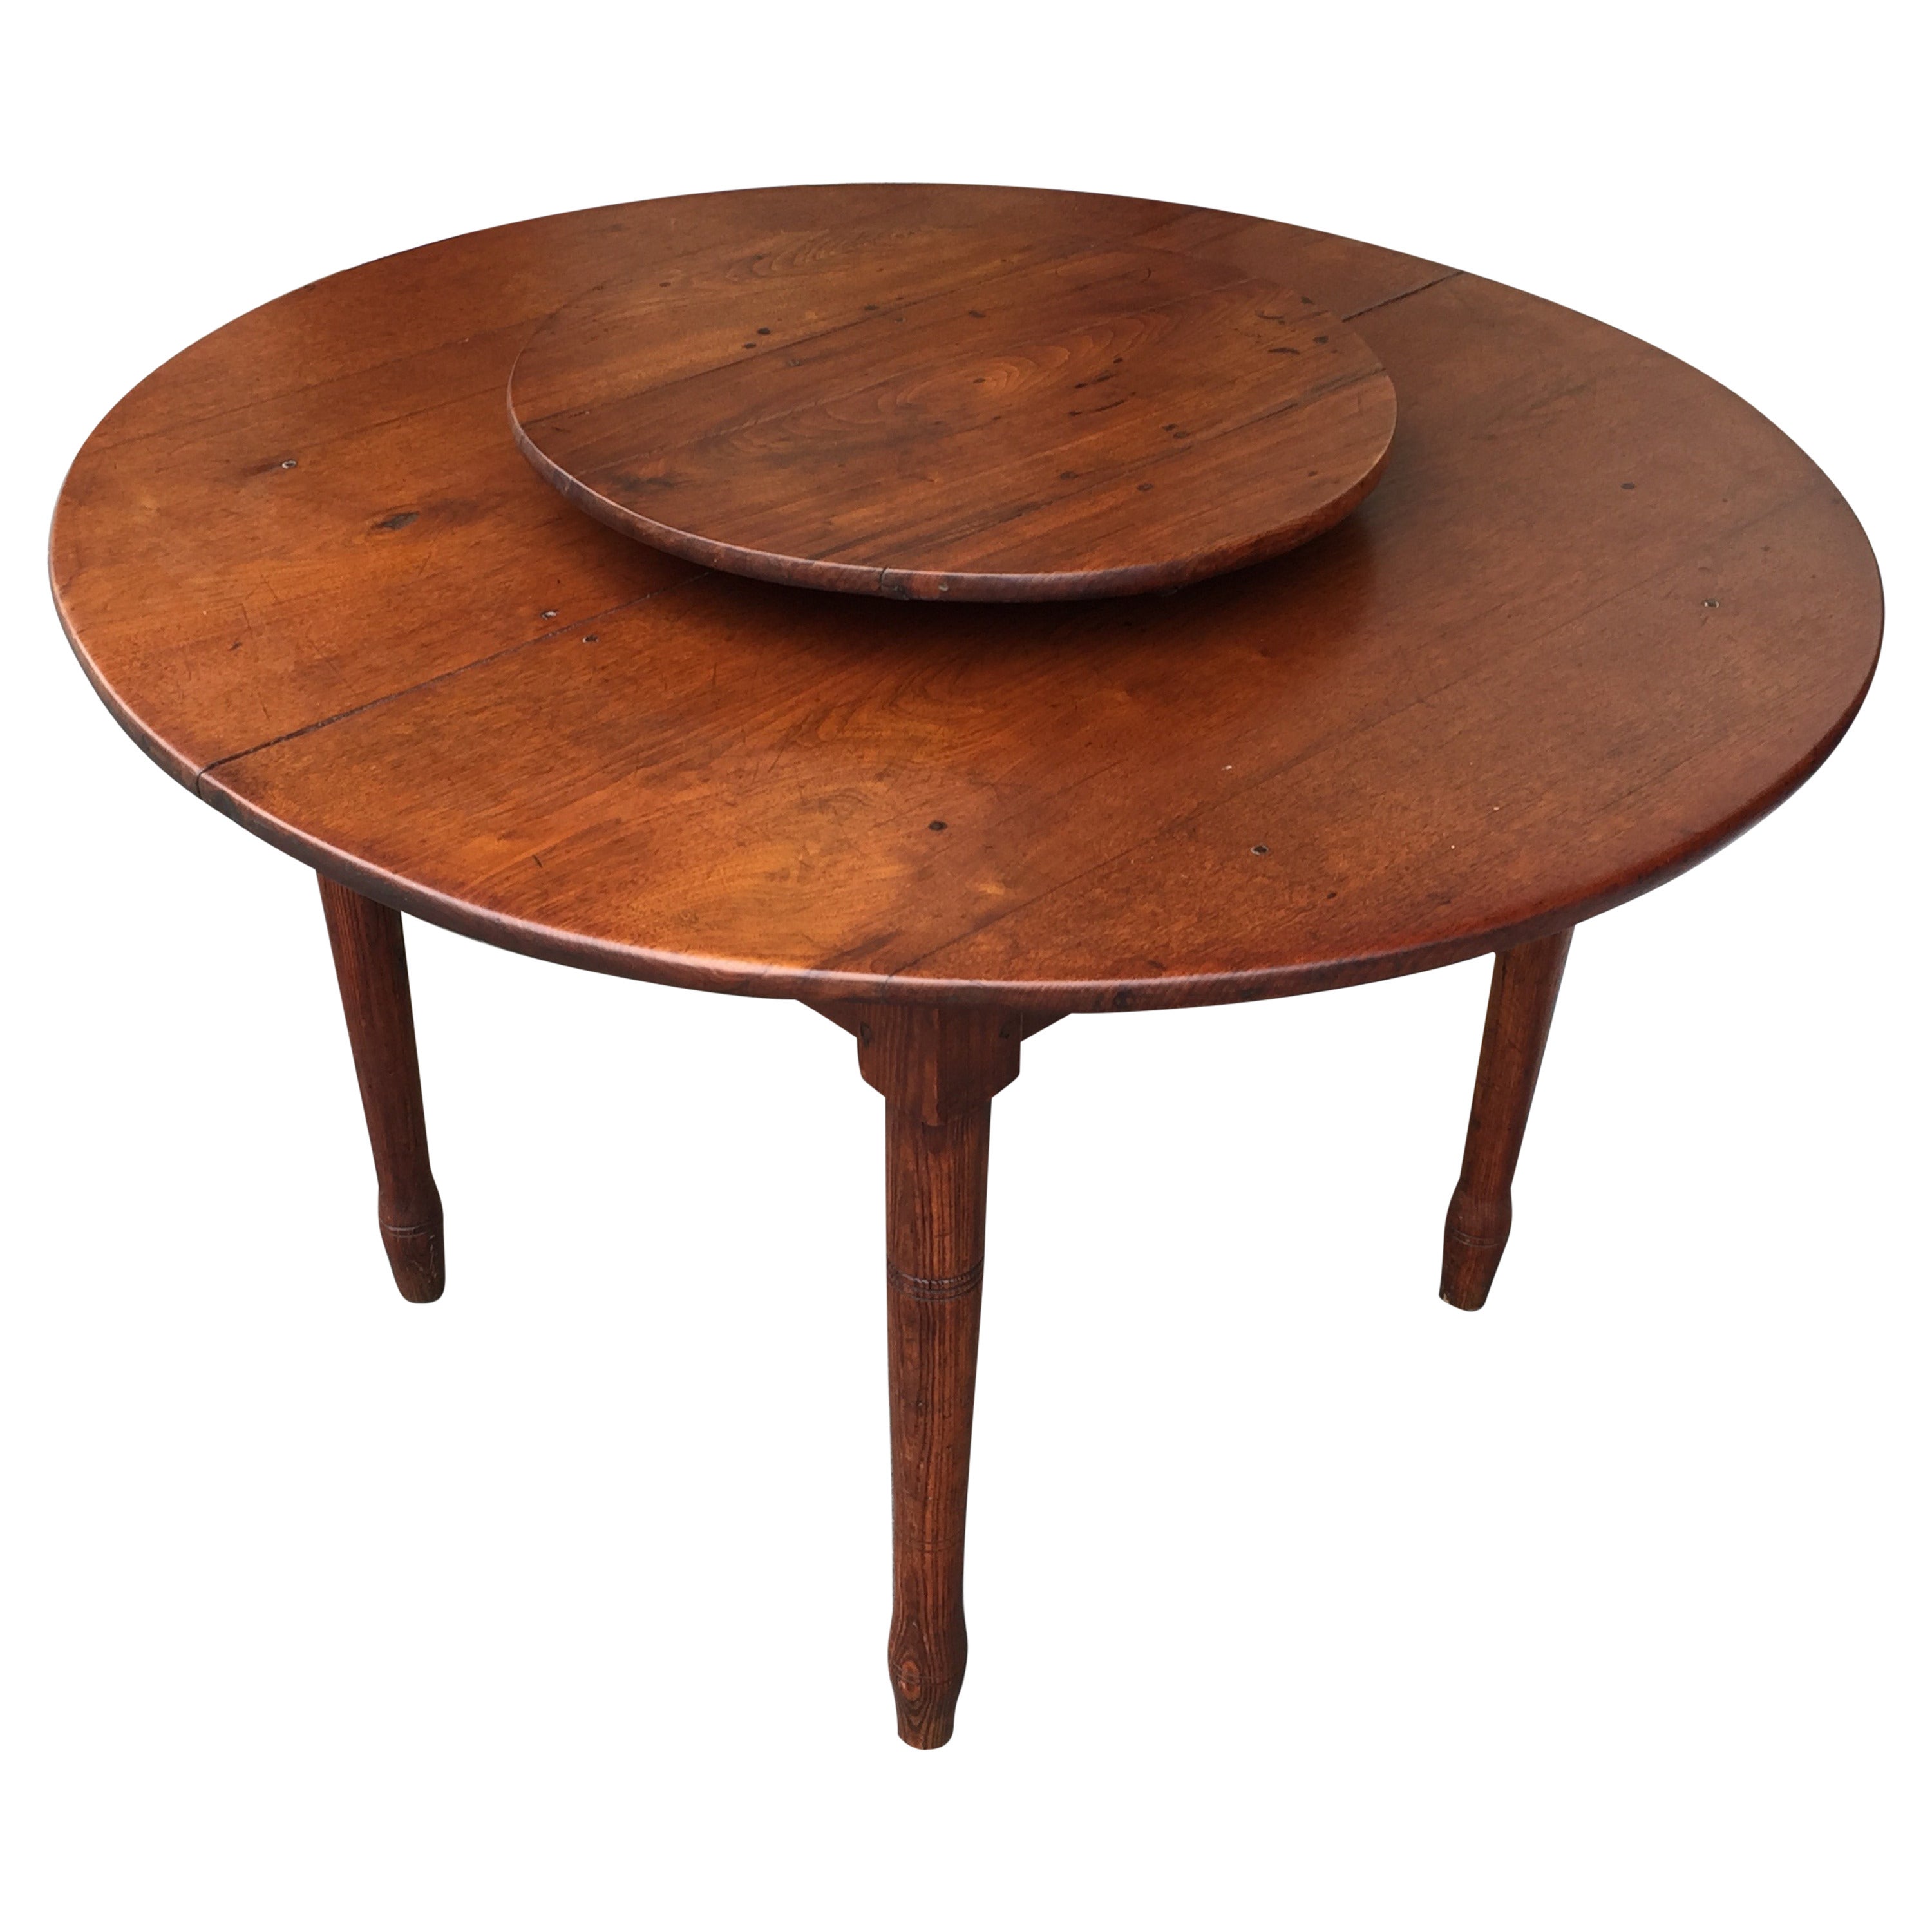 American Southern Lazy Susan Dining Table, circa 1830